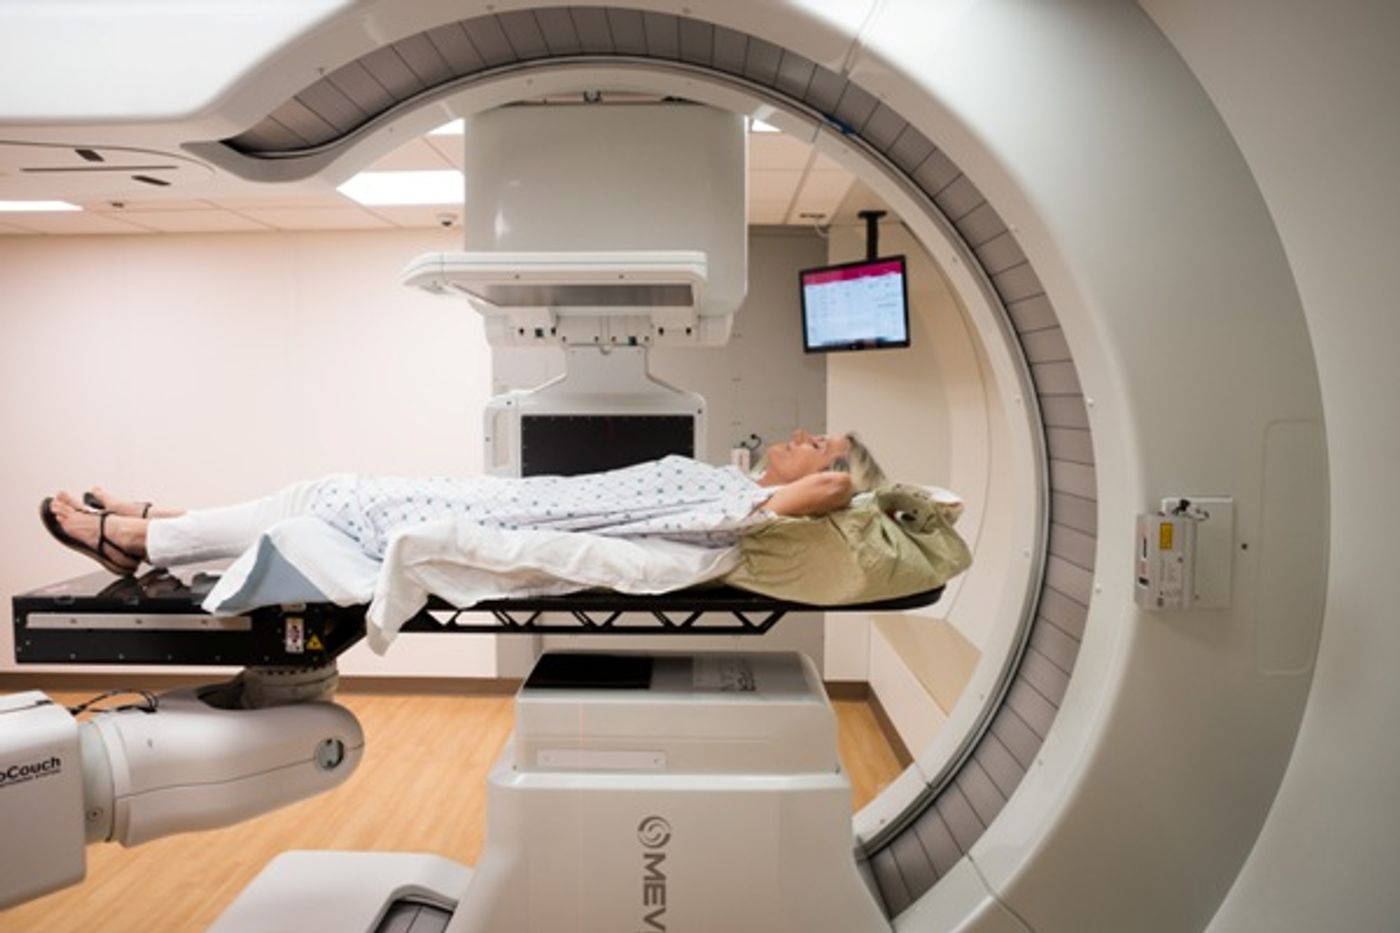 New research suggests proton therapy could greatly reduce the risk of side effects. Photo: MedStar Georgetown University Hospital